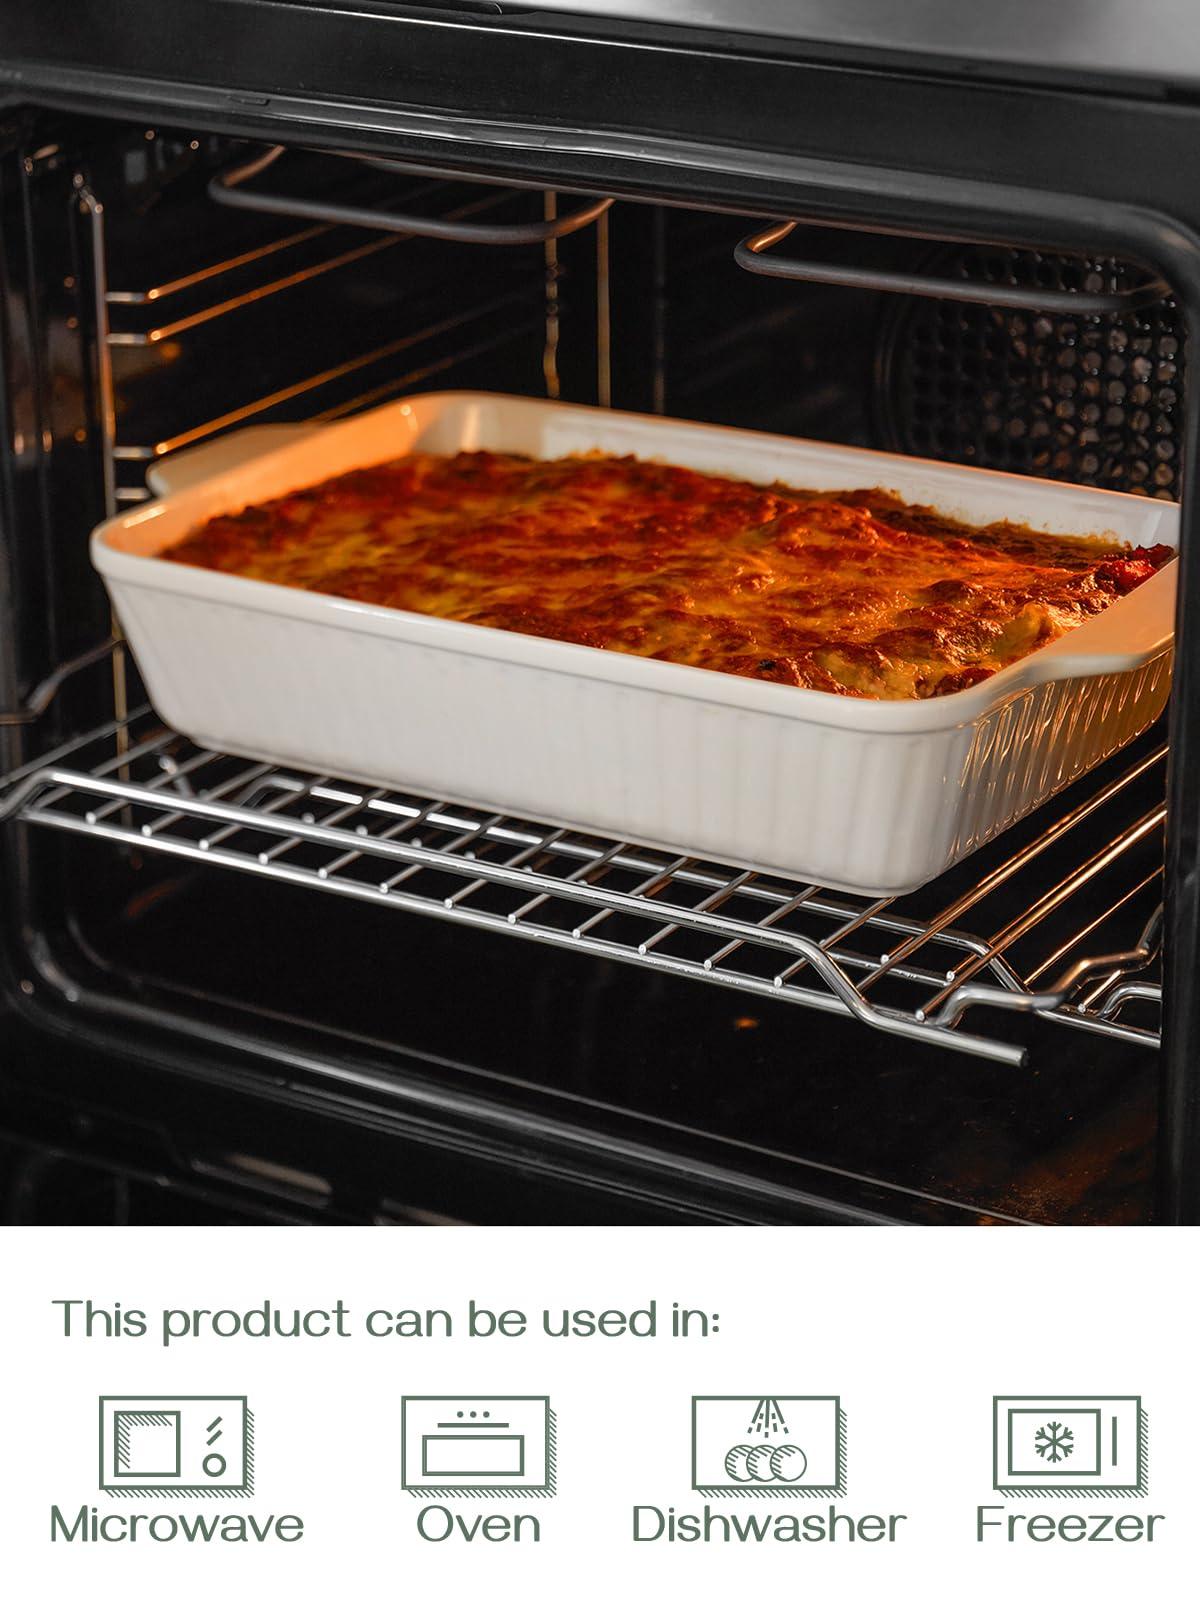 DOWAN Casserole Dish, 9x13 Ceramic Baking Dish, Large Lasagna Pan Deep for Oven, 4.2 Quarts Baking Pan with Handles, Oven Safe and Durable Bakeware for Lasagna, Home Decor Gifts, White - CookCave